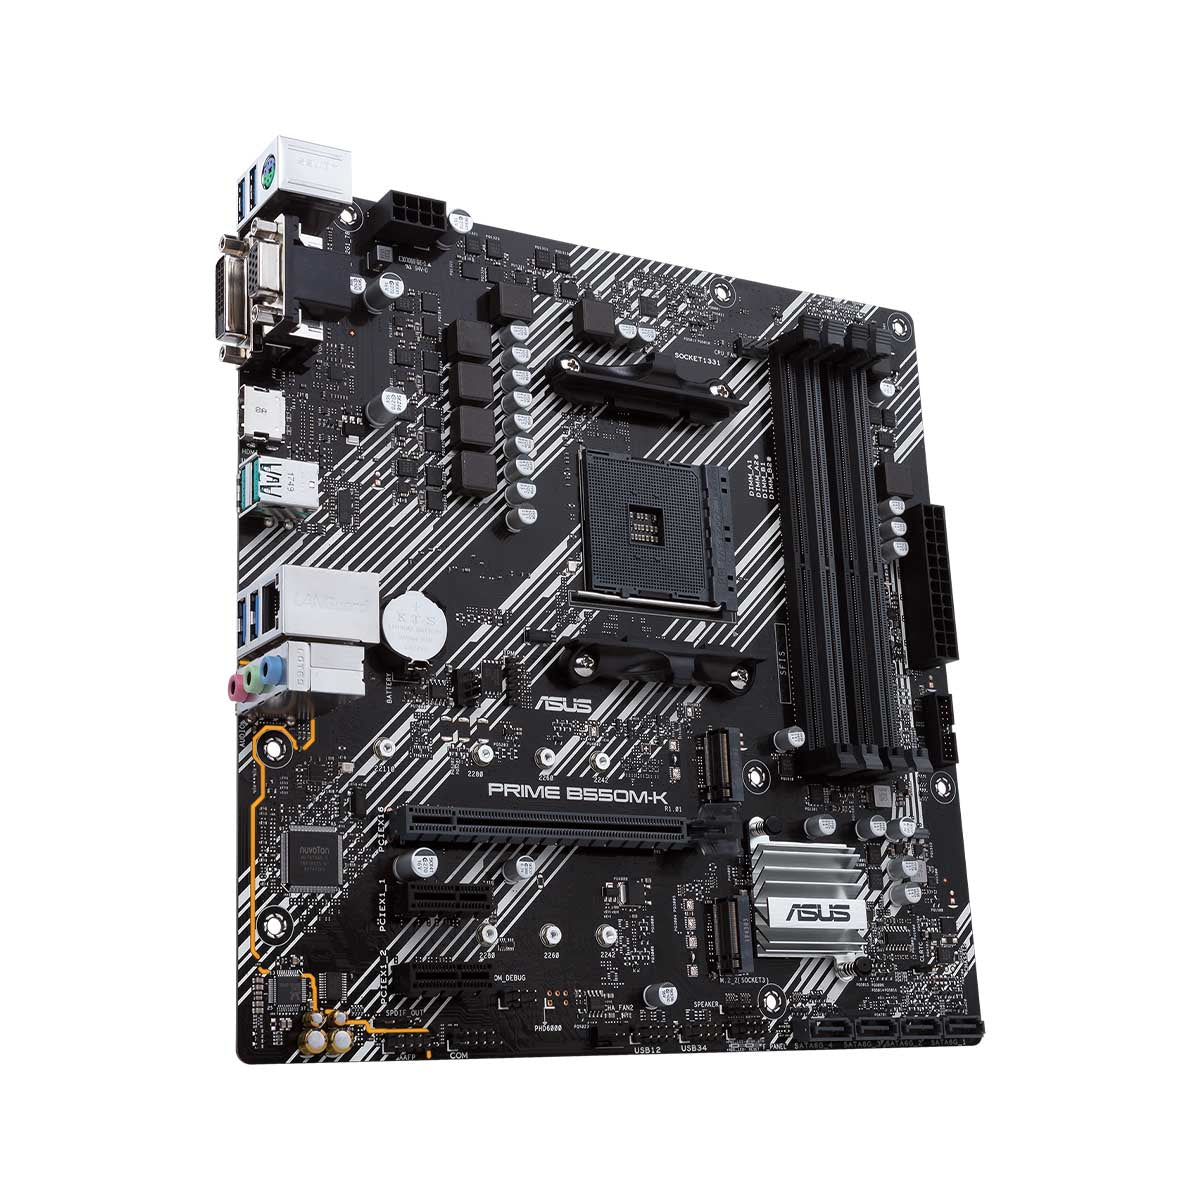 ASUS B550 PRIME B550M-K AMD A4 mATX Motherboard with PCIe 4.0 Dual M.2 and Aura Sync